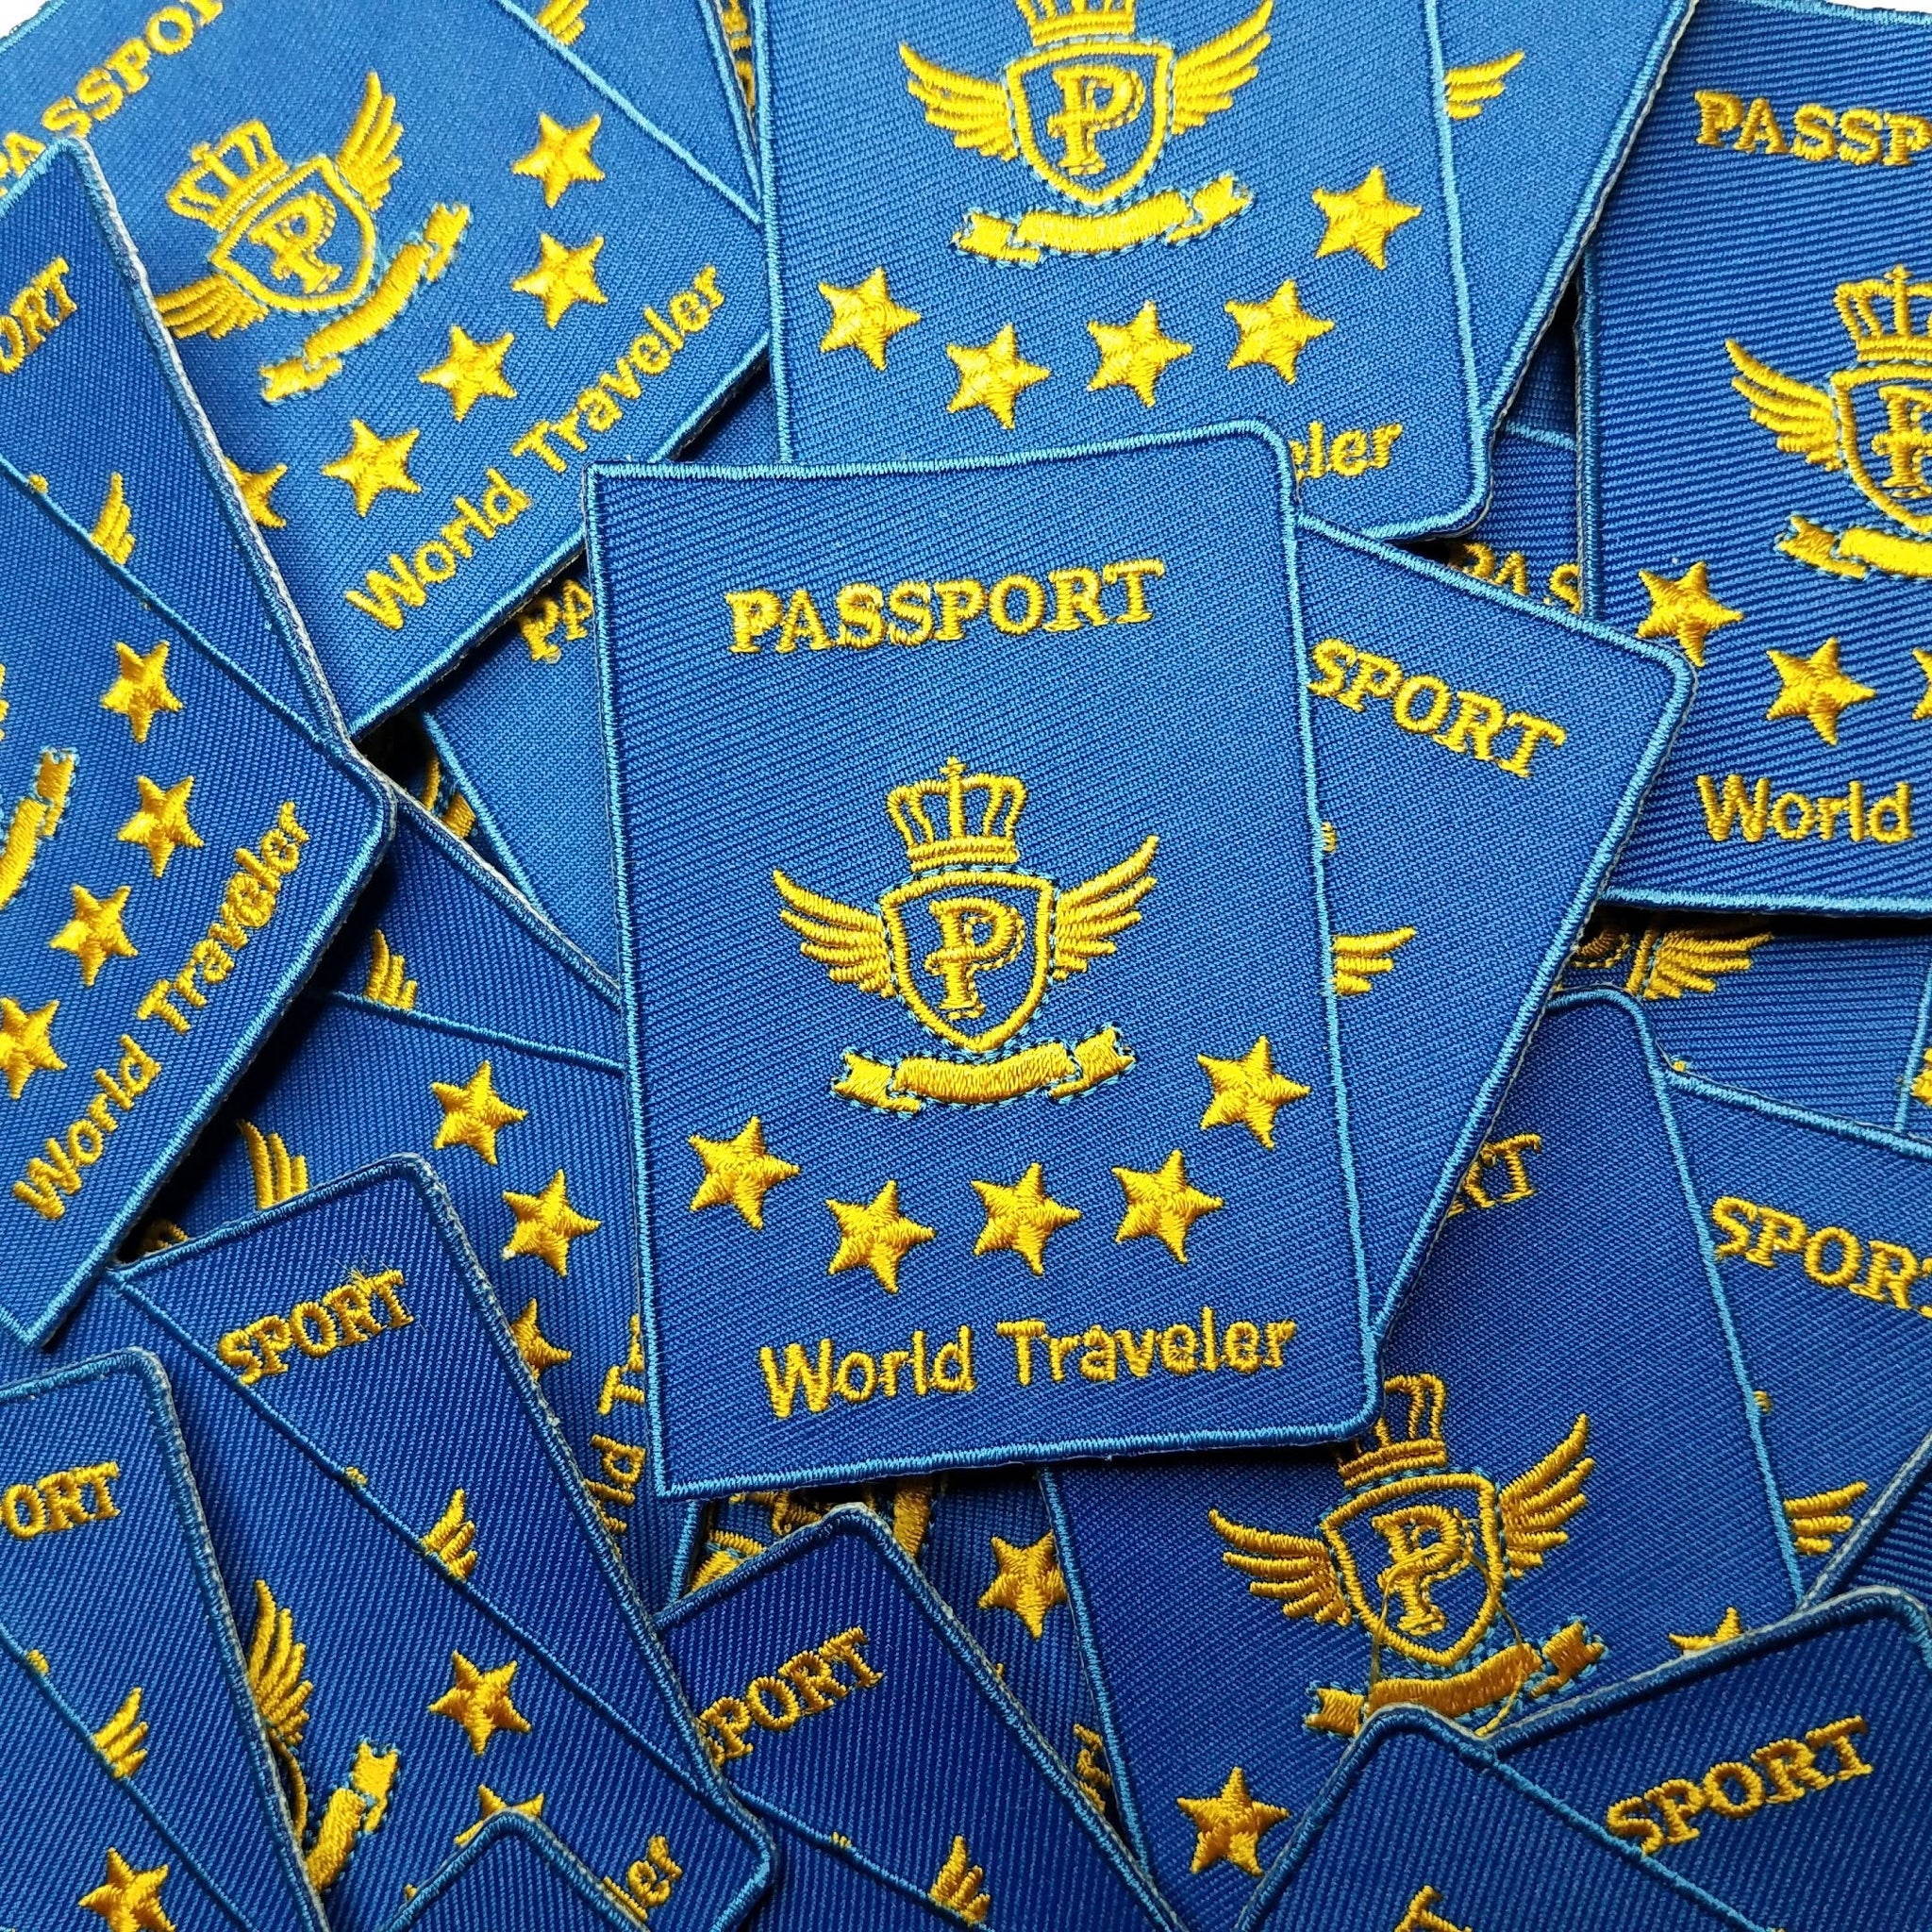 Exclusive "World Traveler," Gold Passport Patch, Unisex Iron-on Embroidered Patch, Melanin Travels, 3"inch x 3" Patch